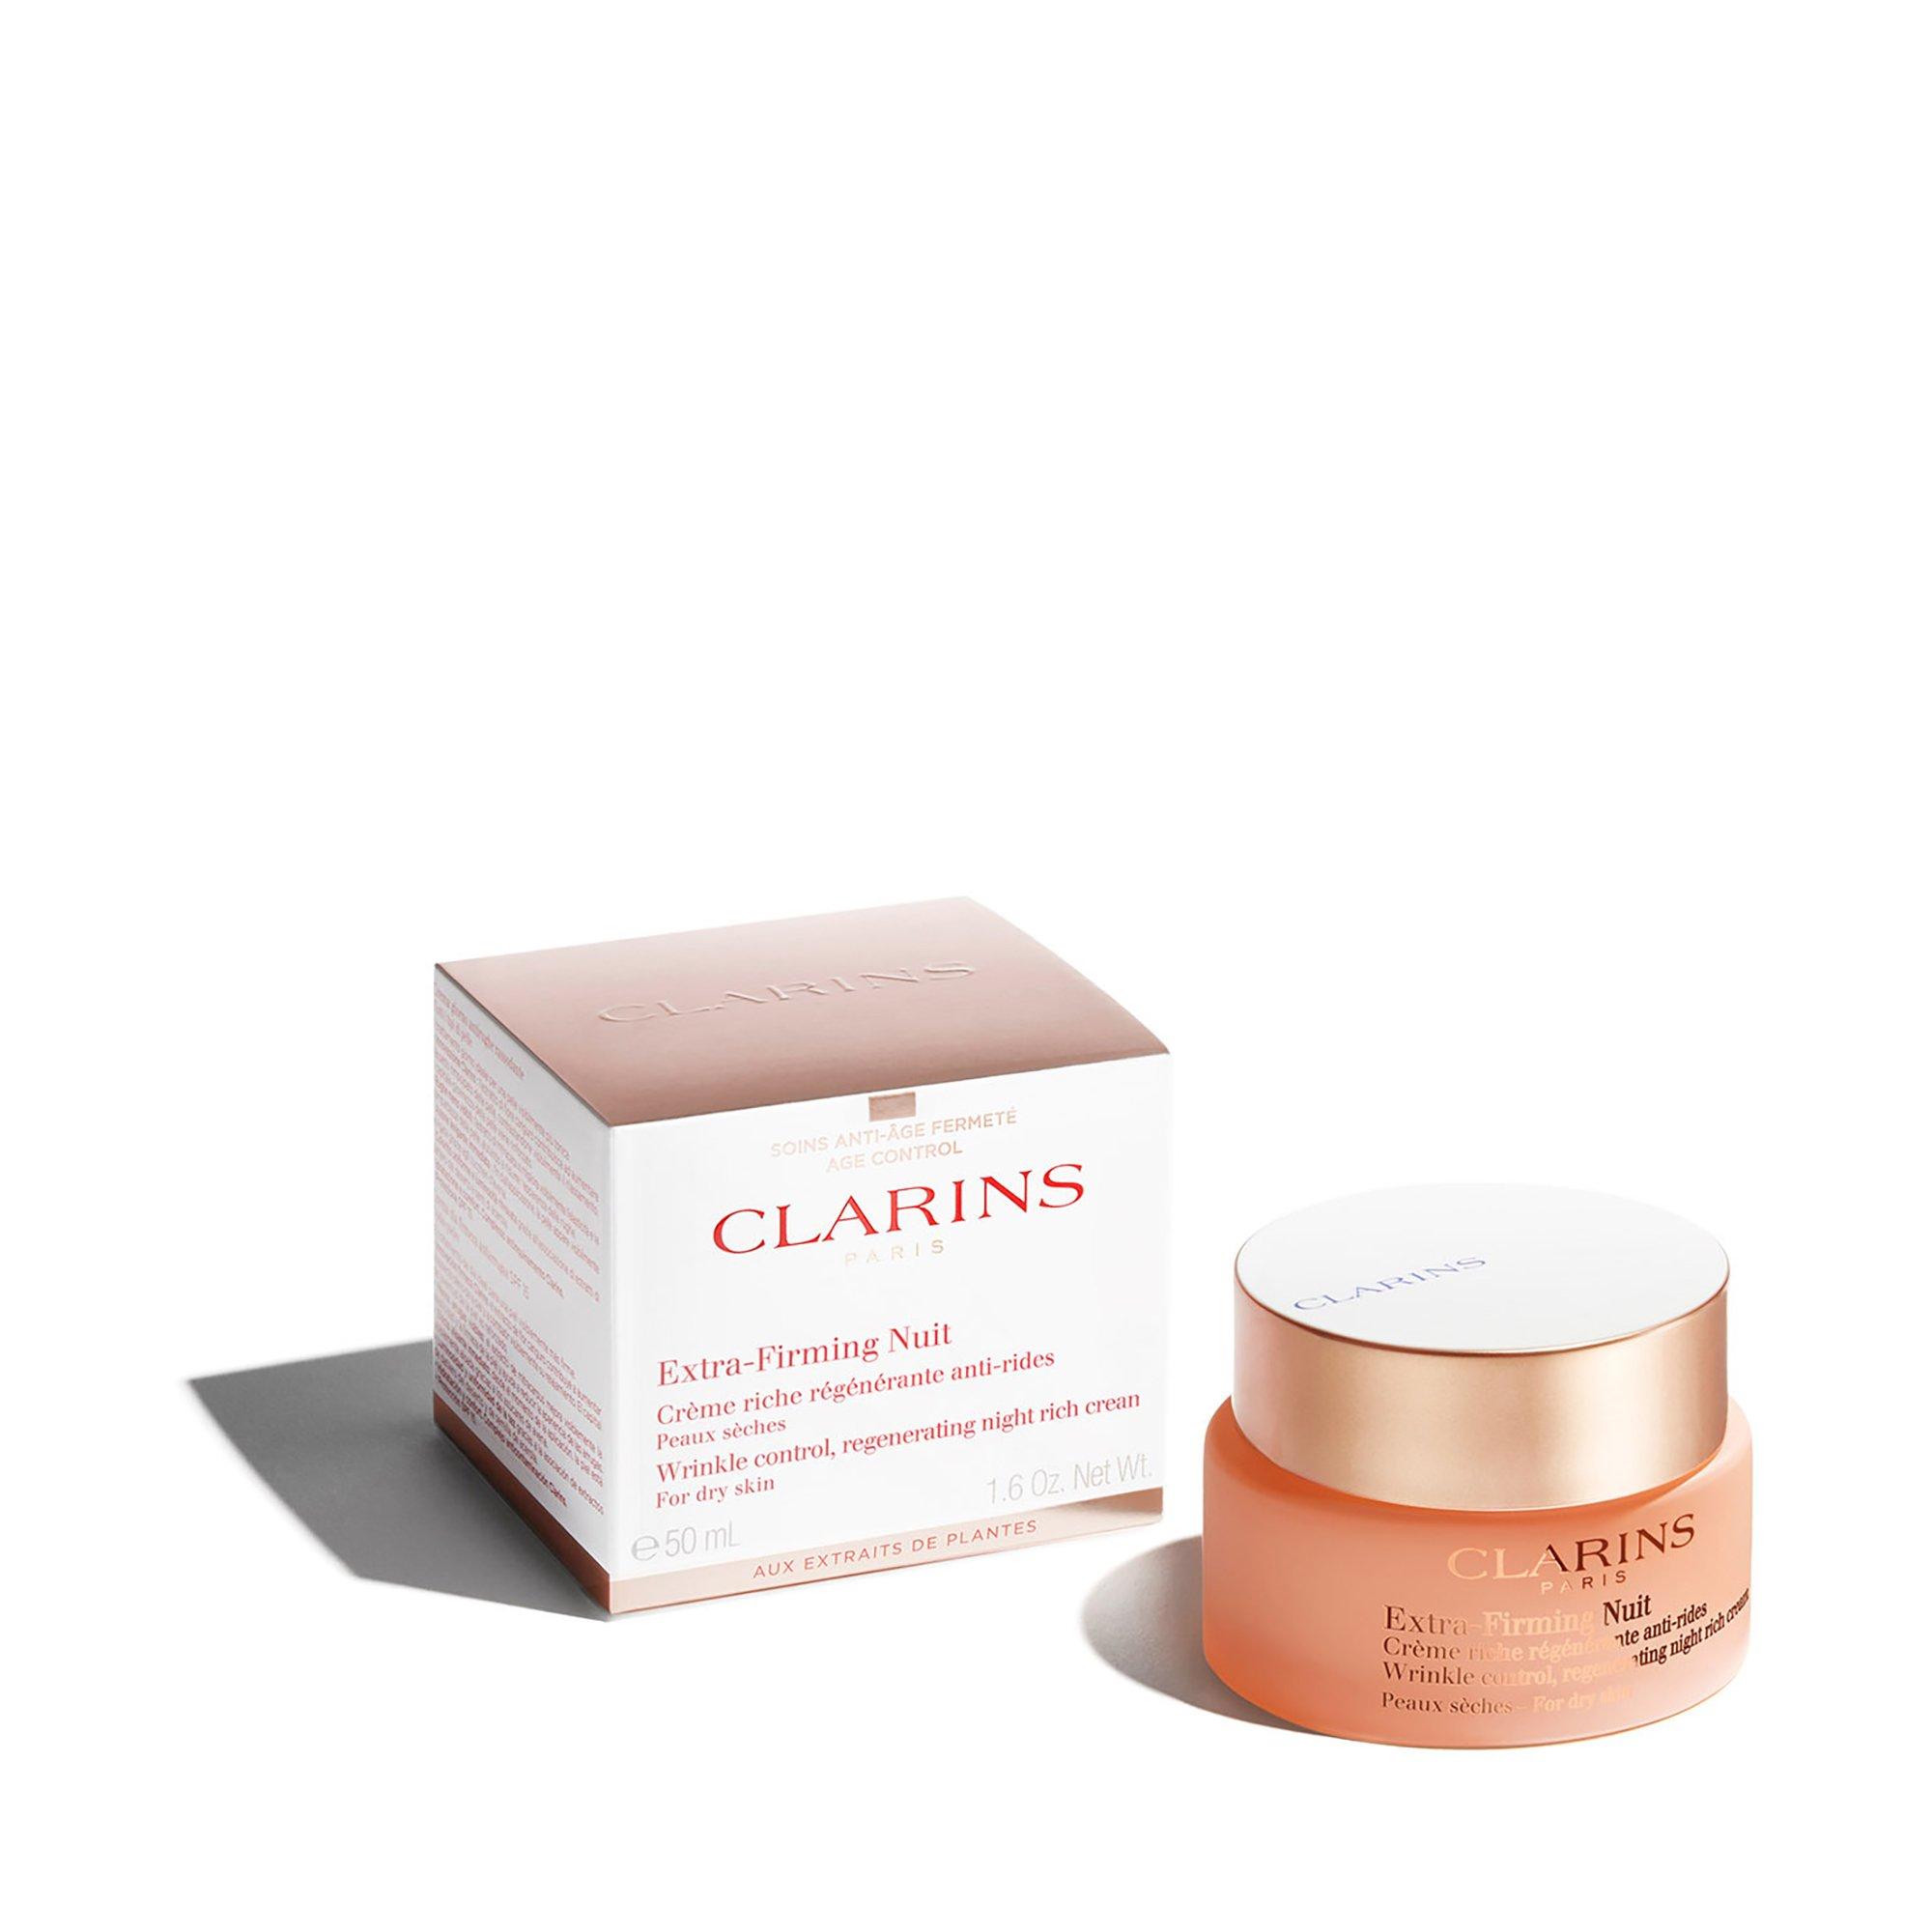 Image of CLARINS Extra-Firming Nuit Peau Sèche - 50ml